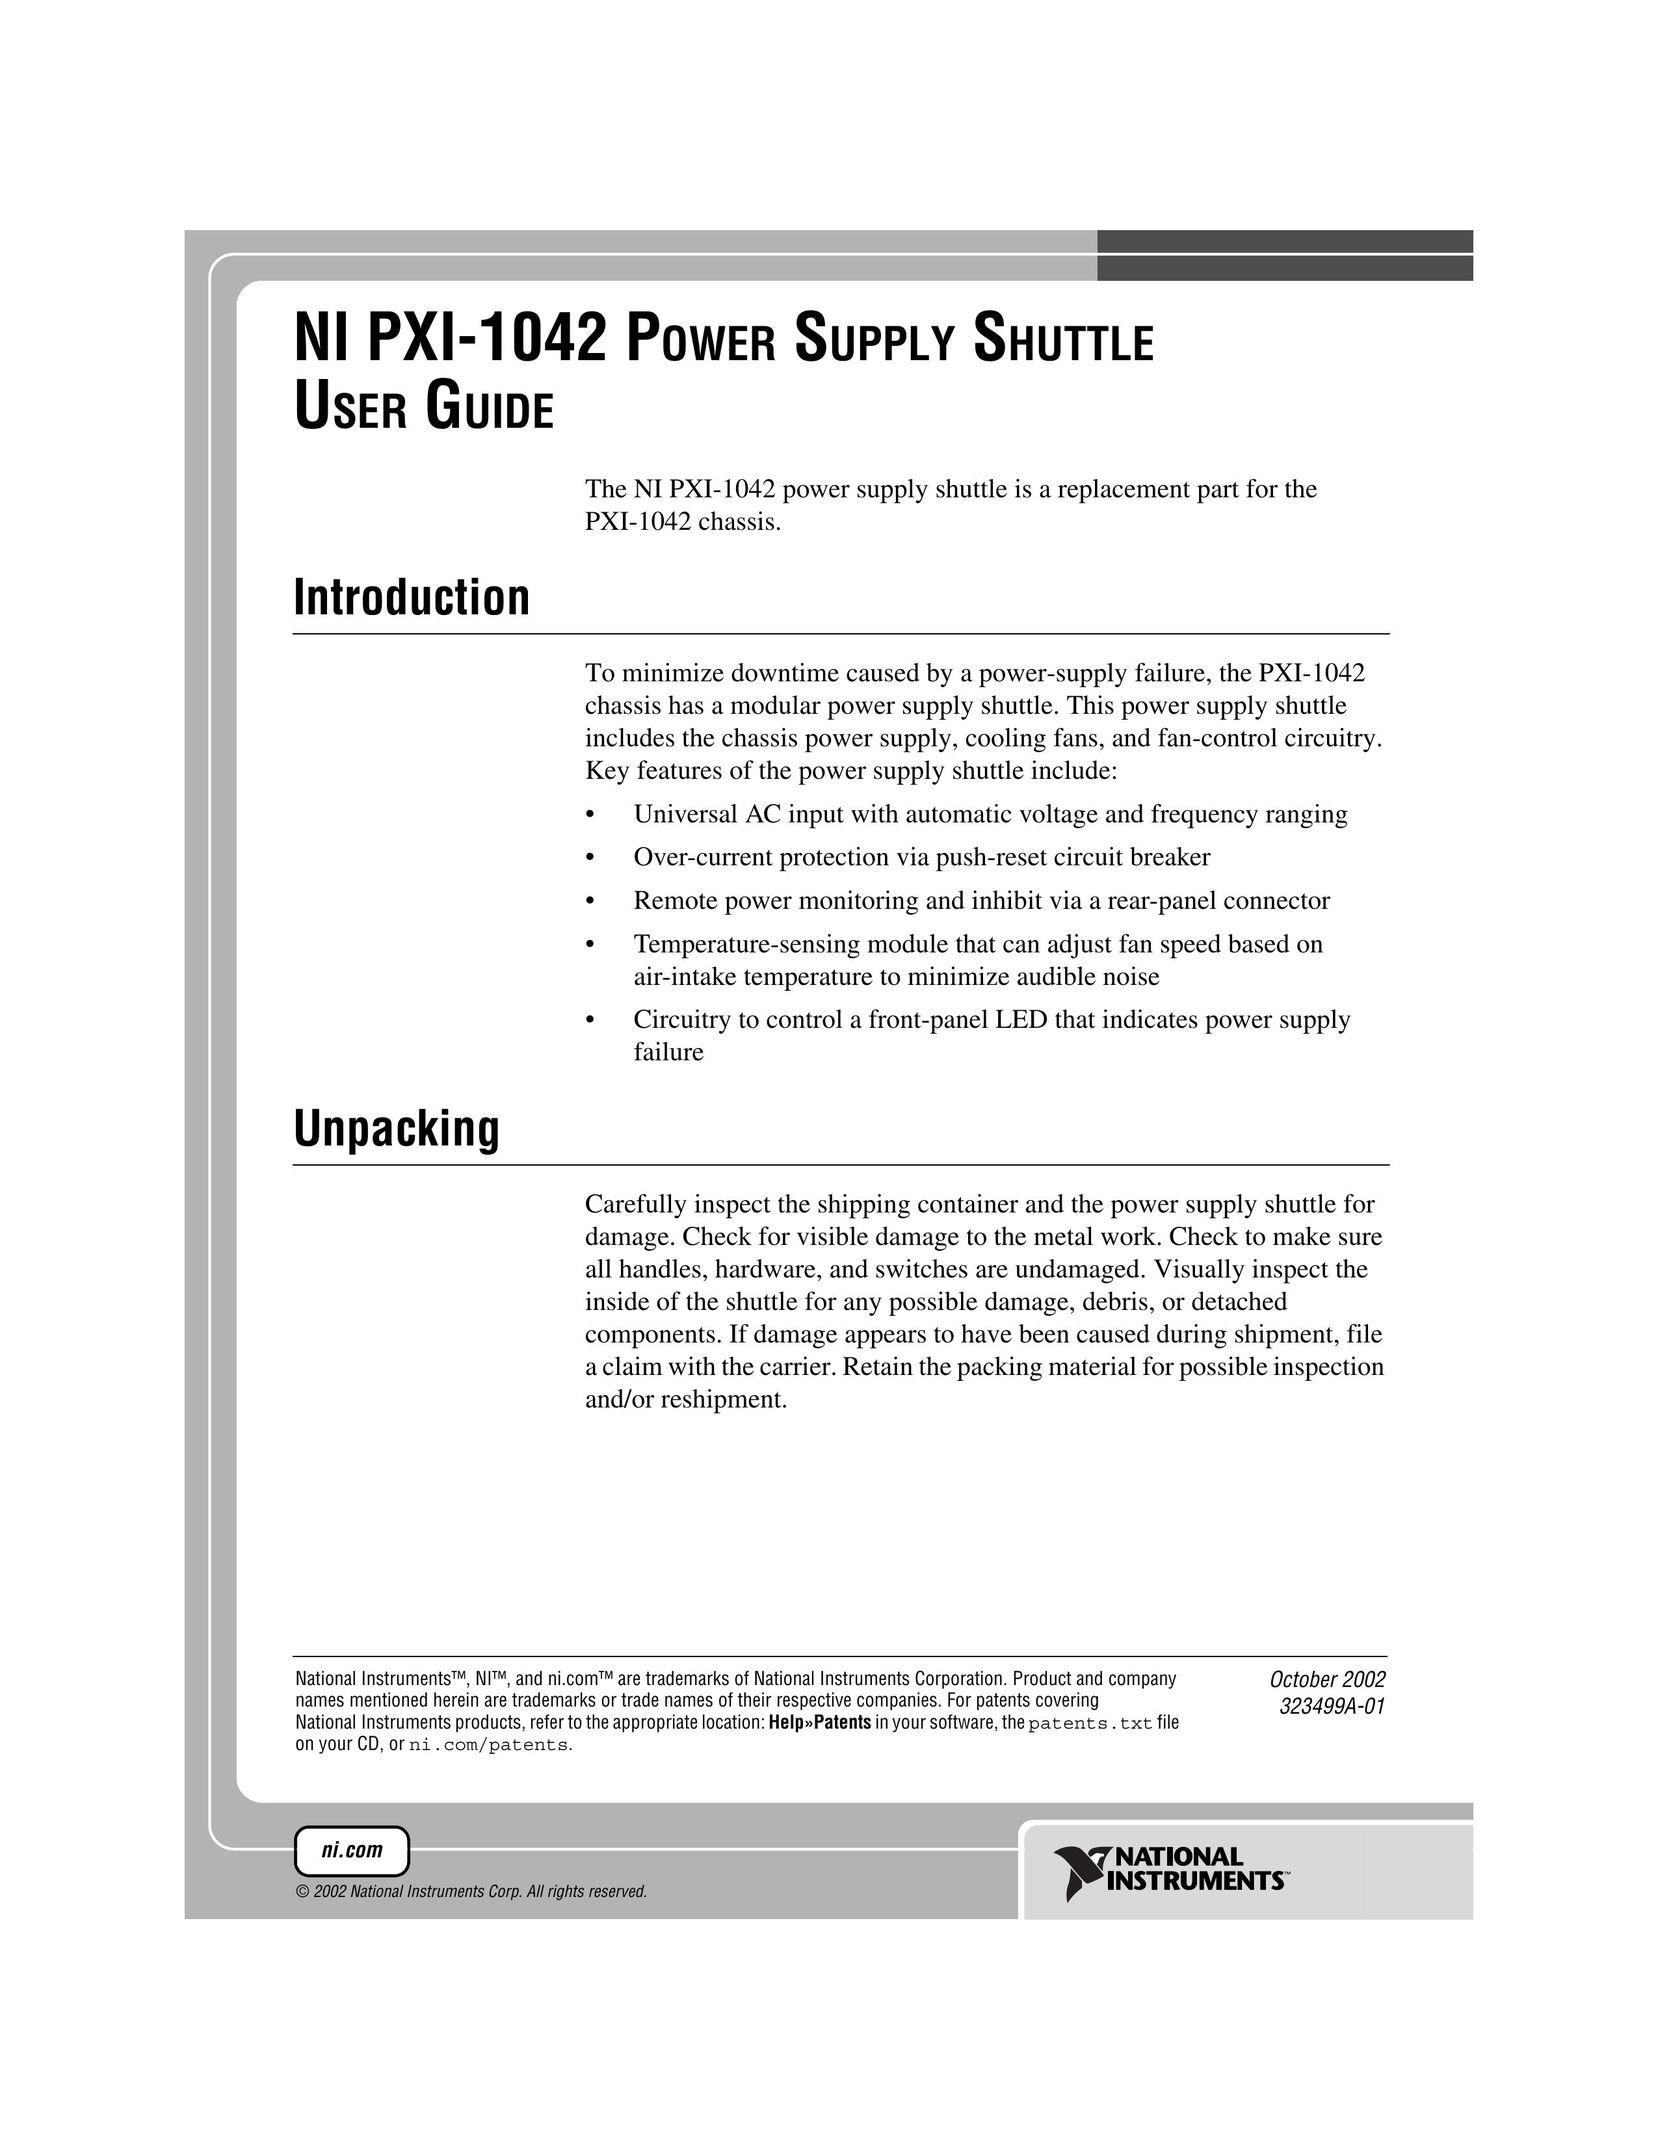 National Instruments PXI-1042 Power Supply User Manual